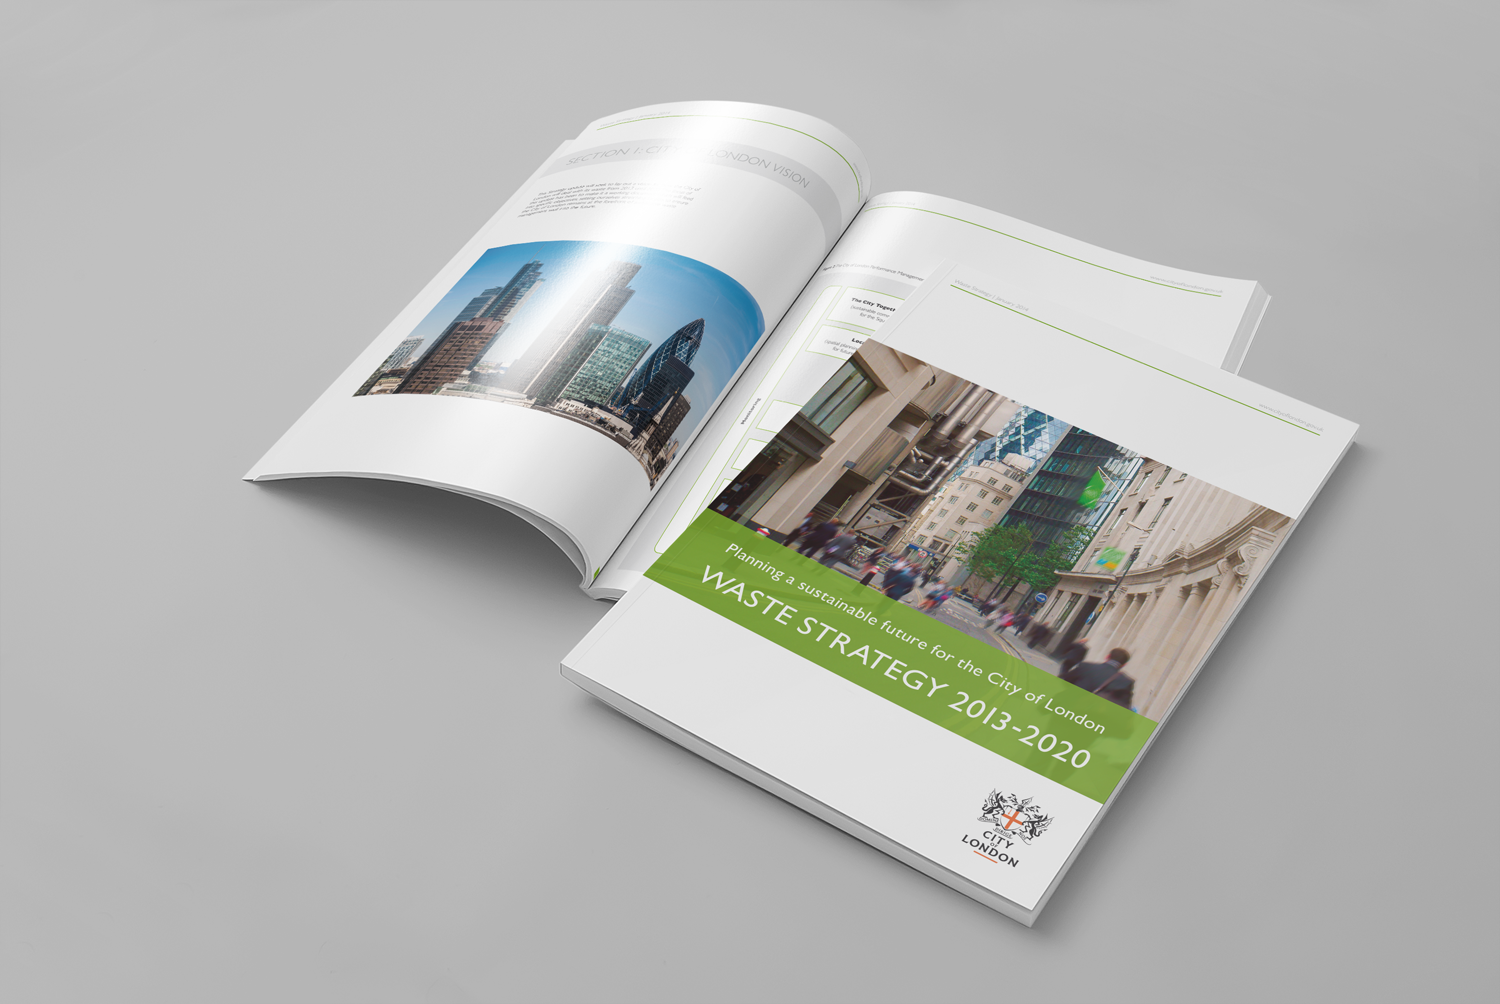 City-of-London-Waste-Strategy-A4-Brochure-get-it-sorted.png